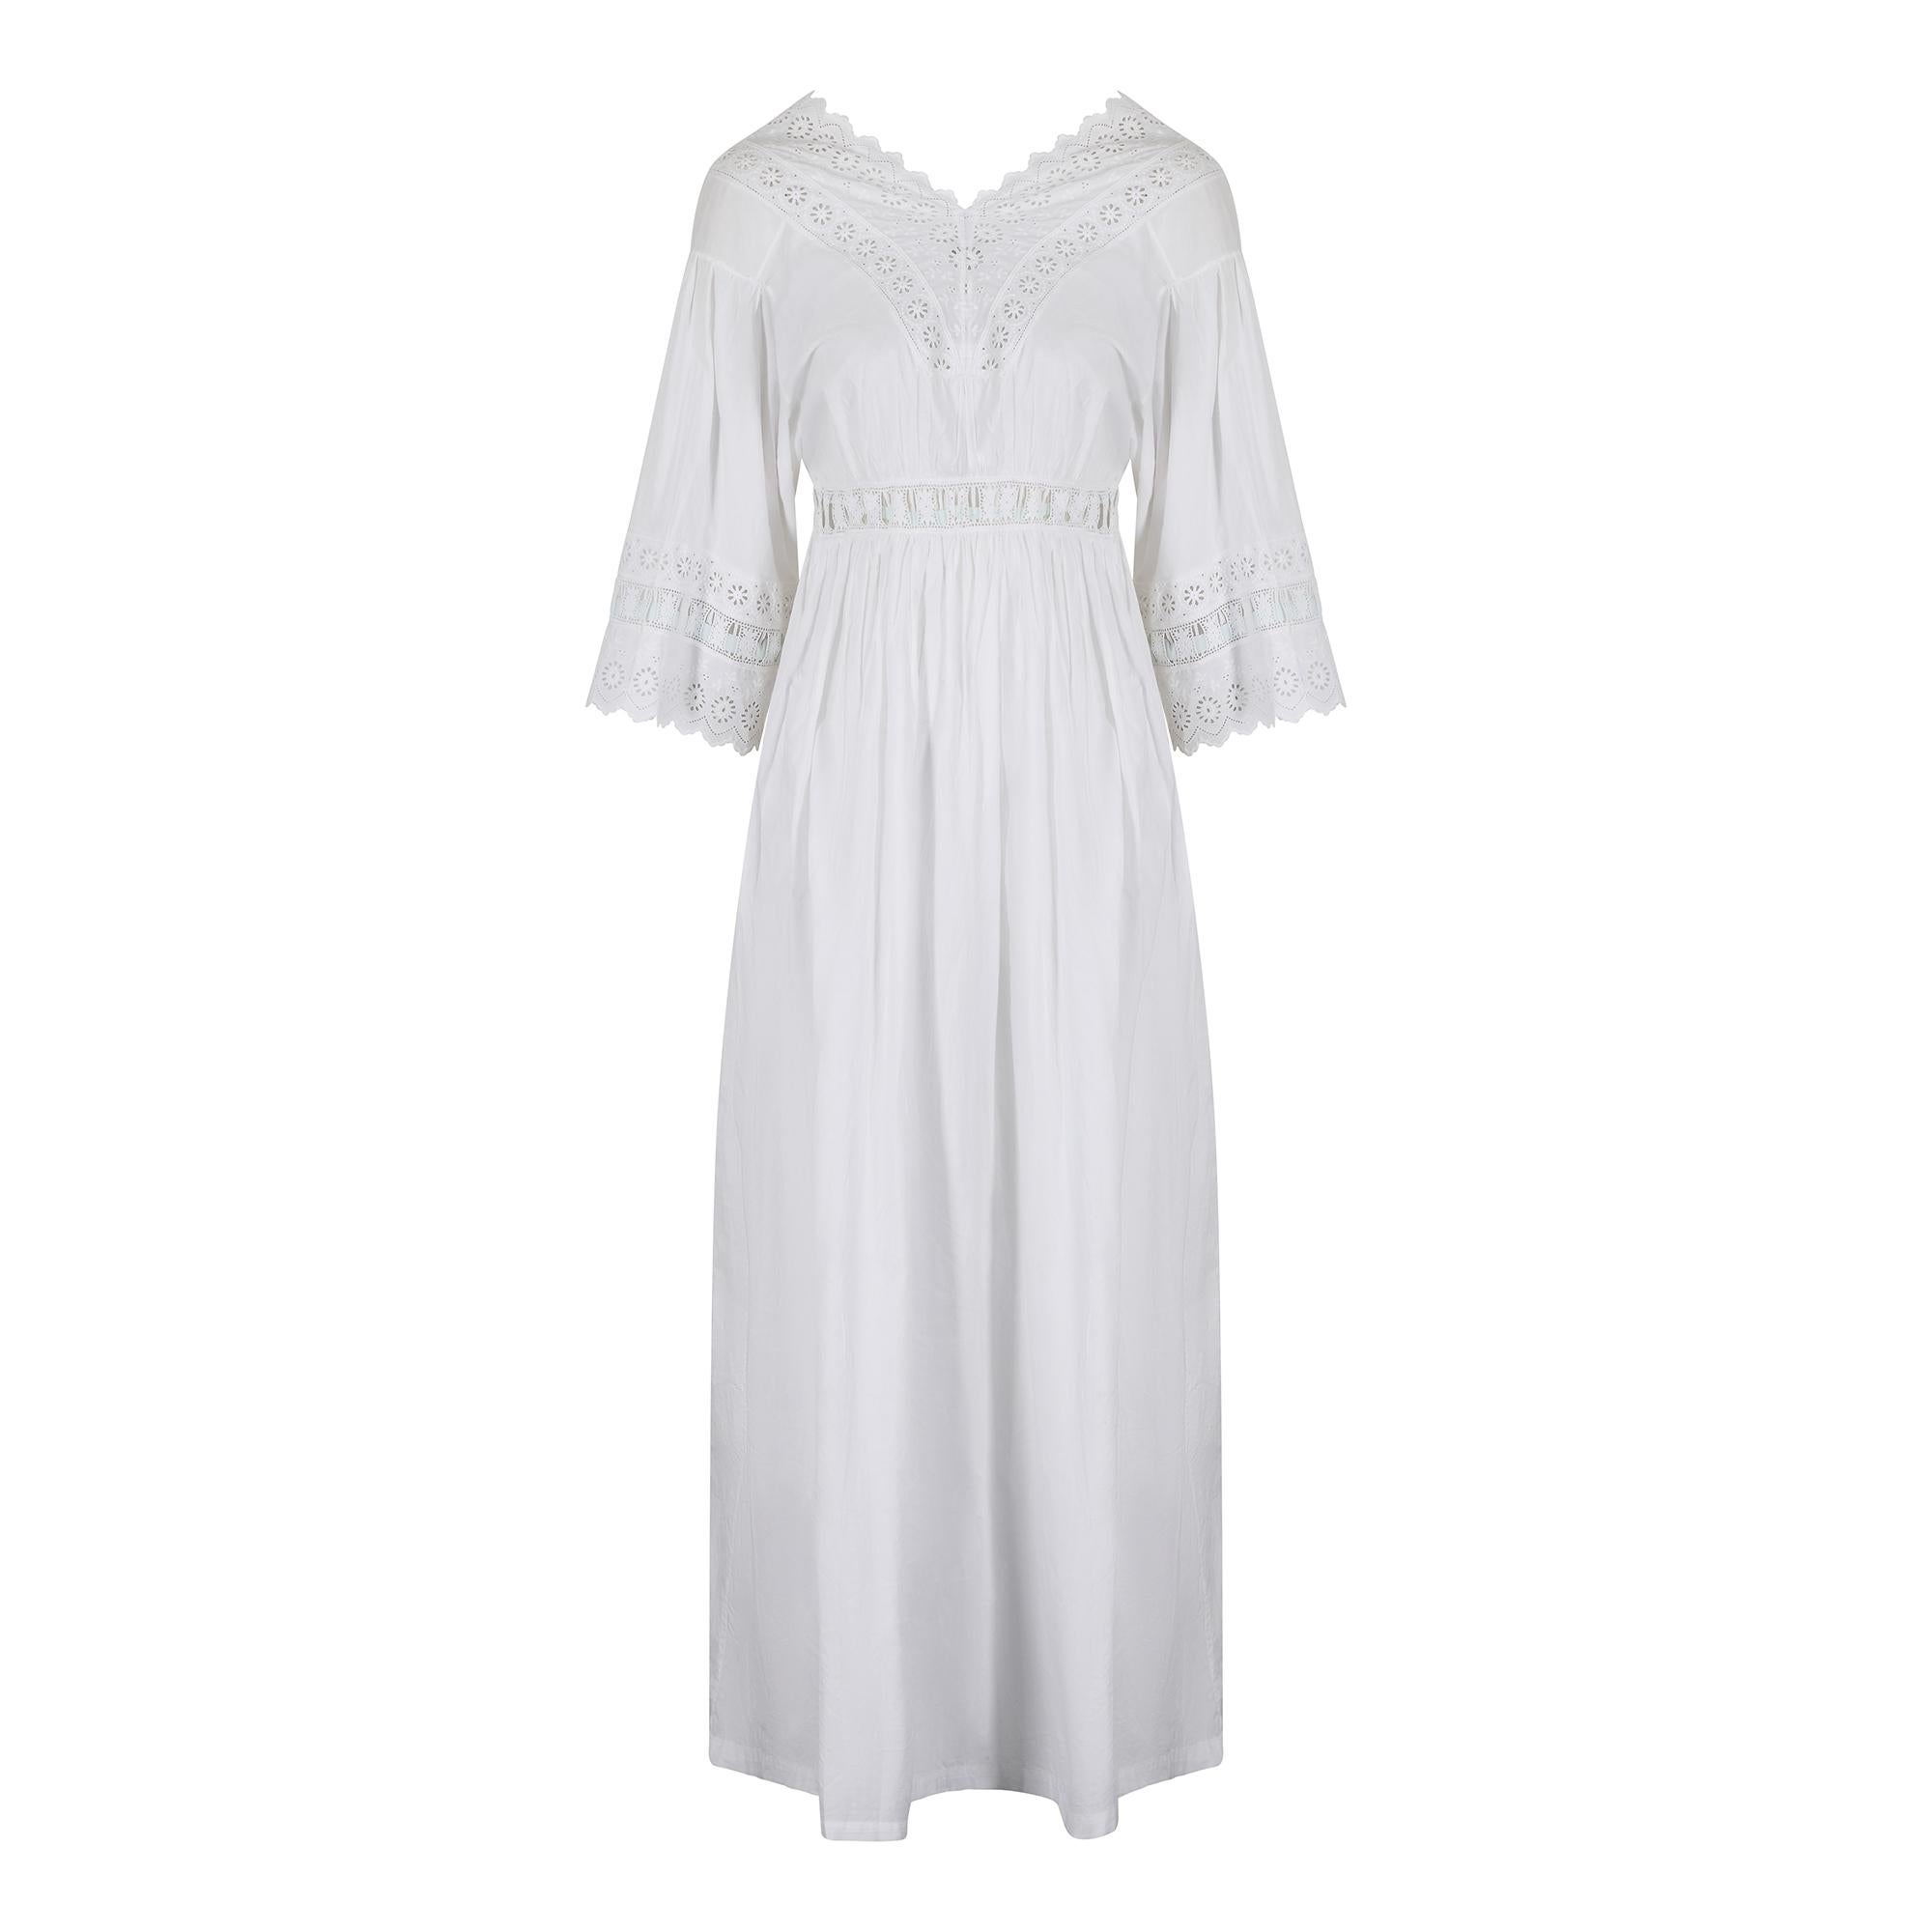 1920s nightgown